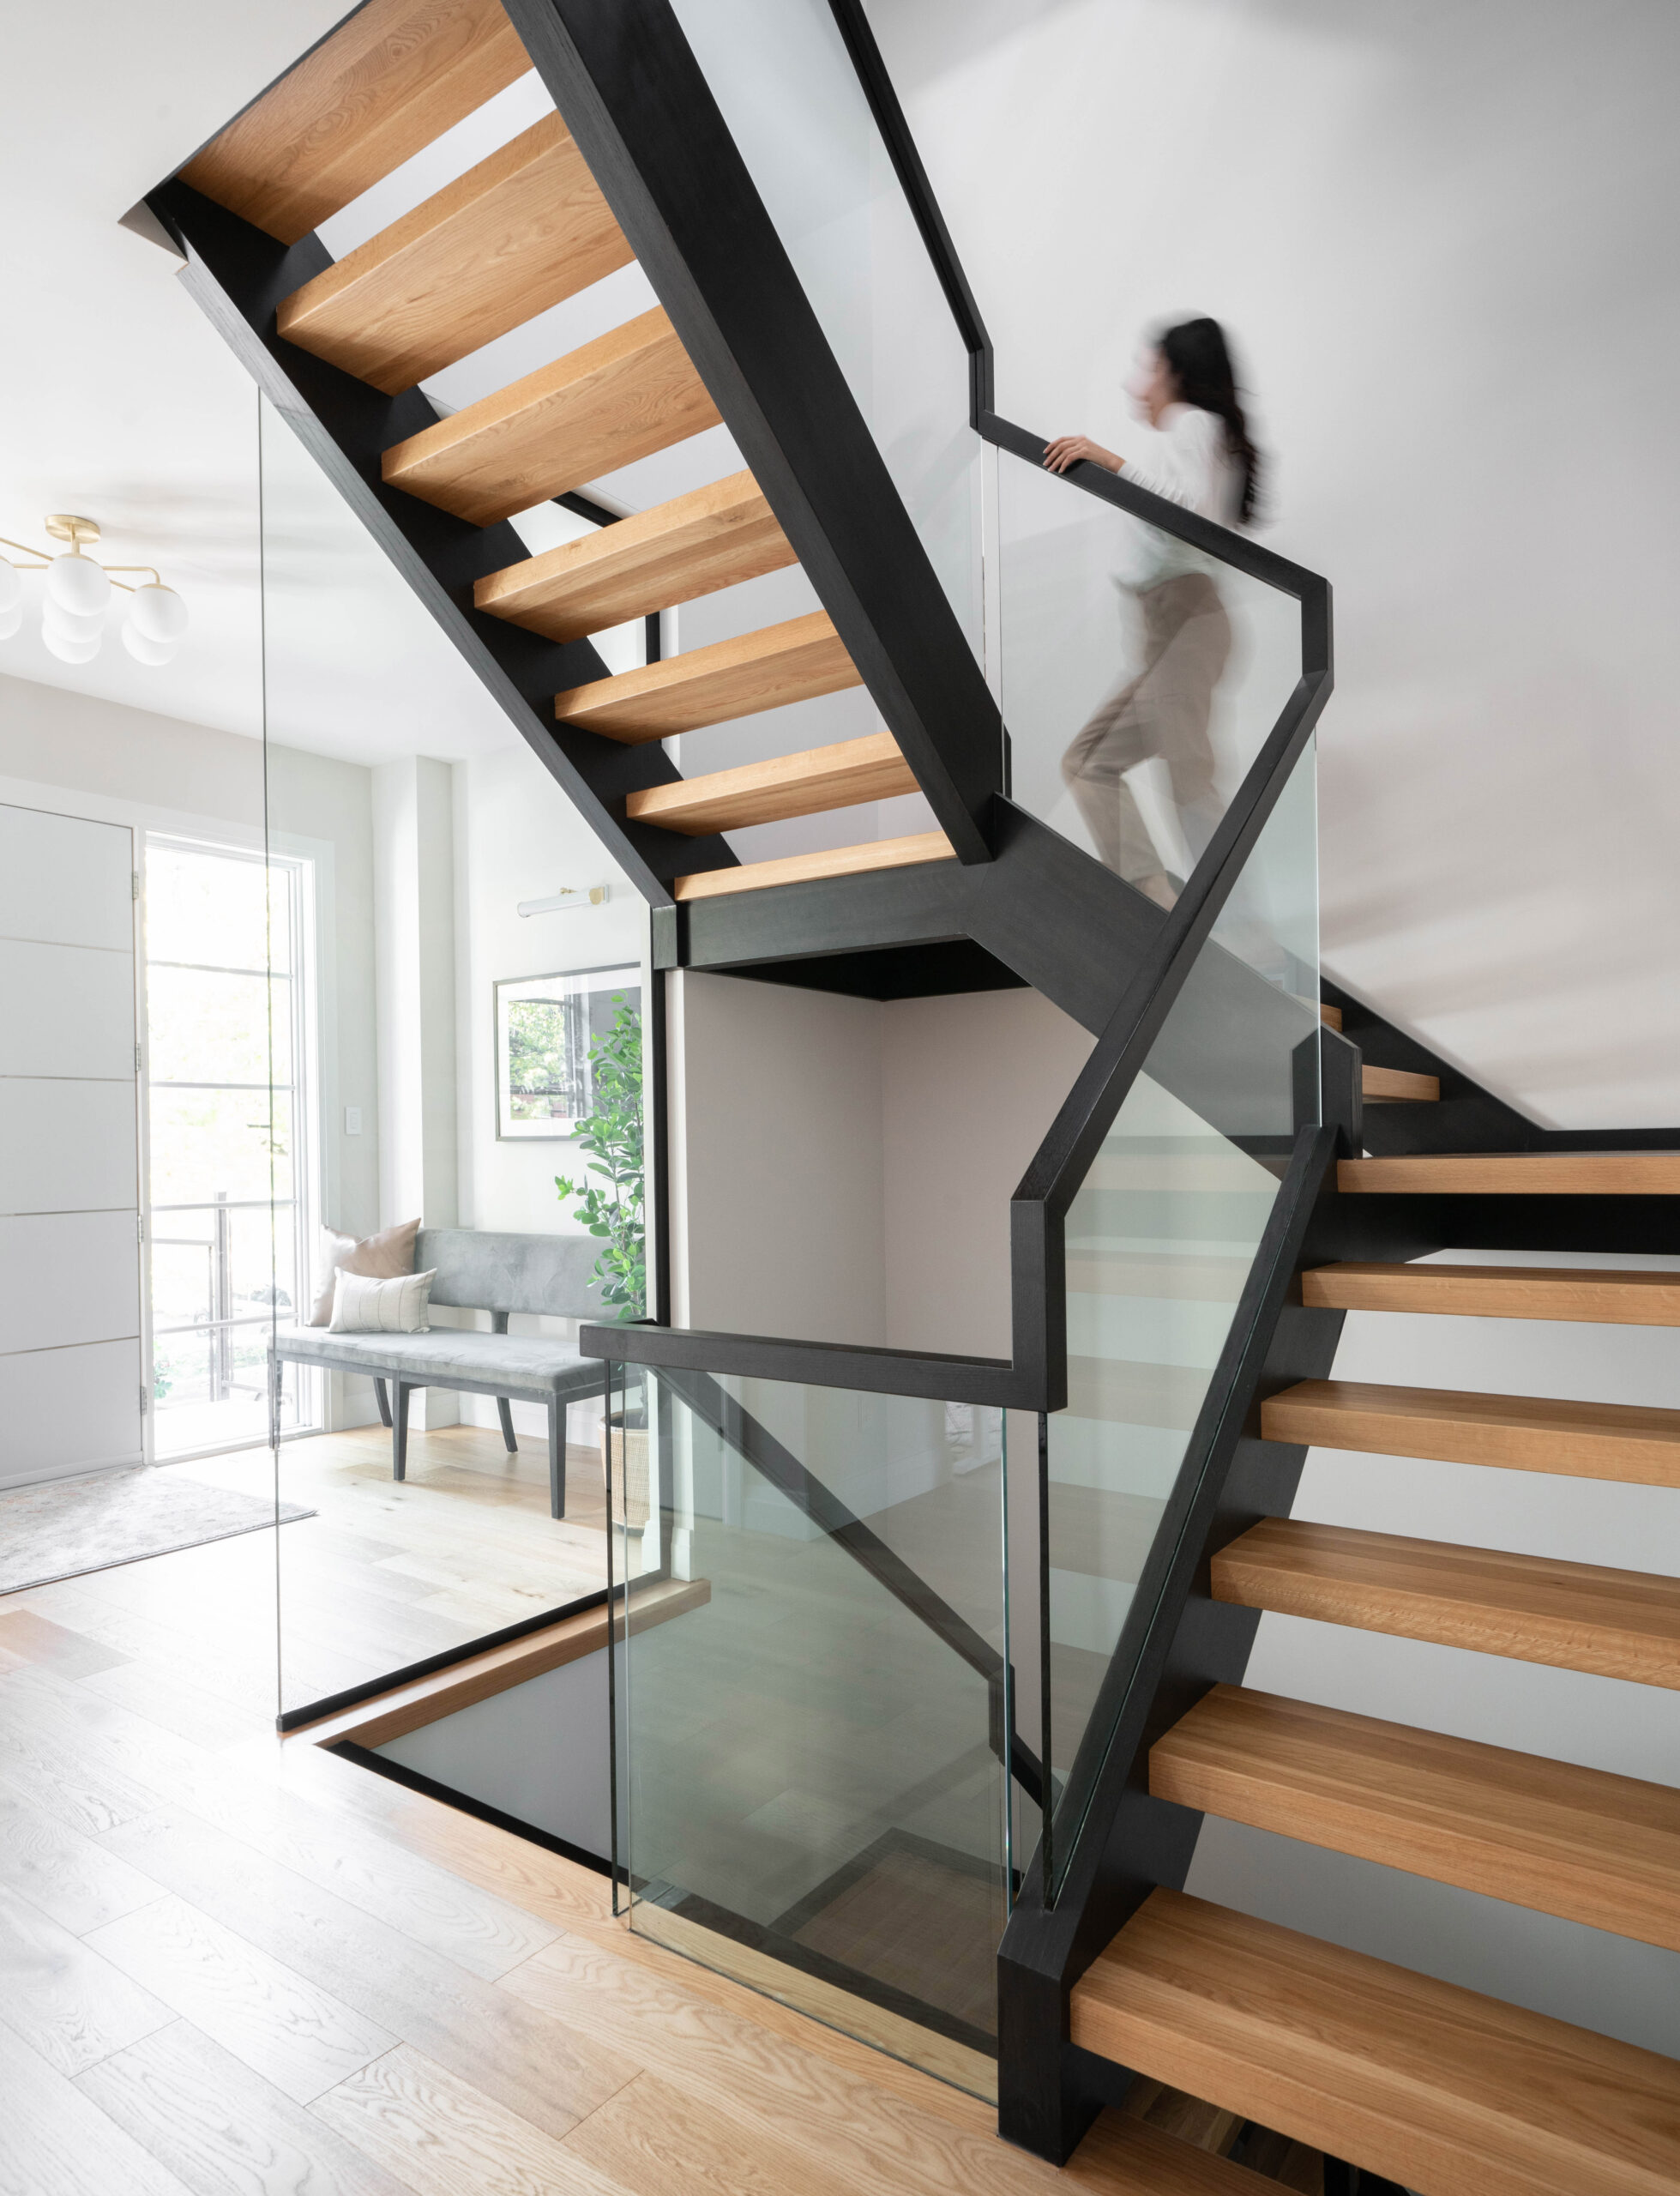 Accurate Stairs Project The Glebe Ottawa